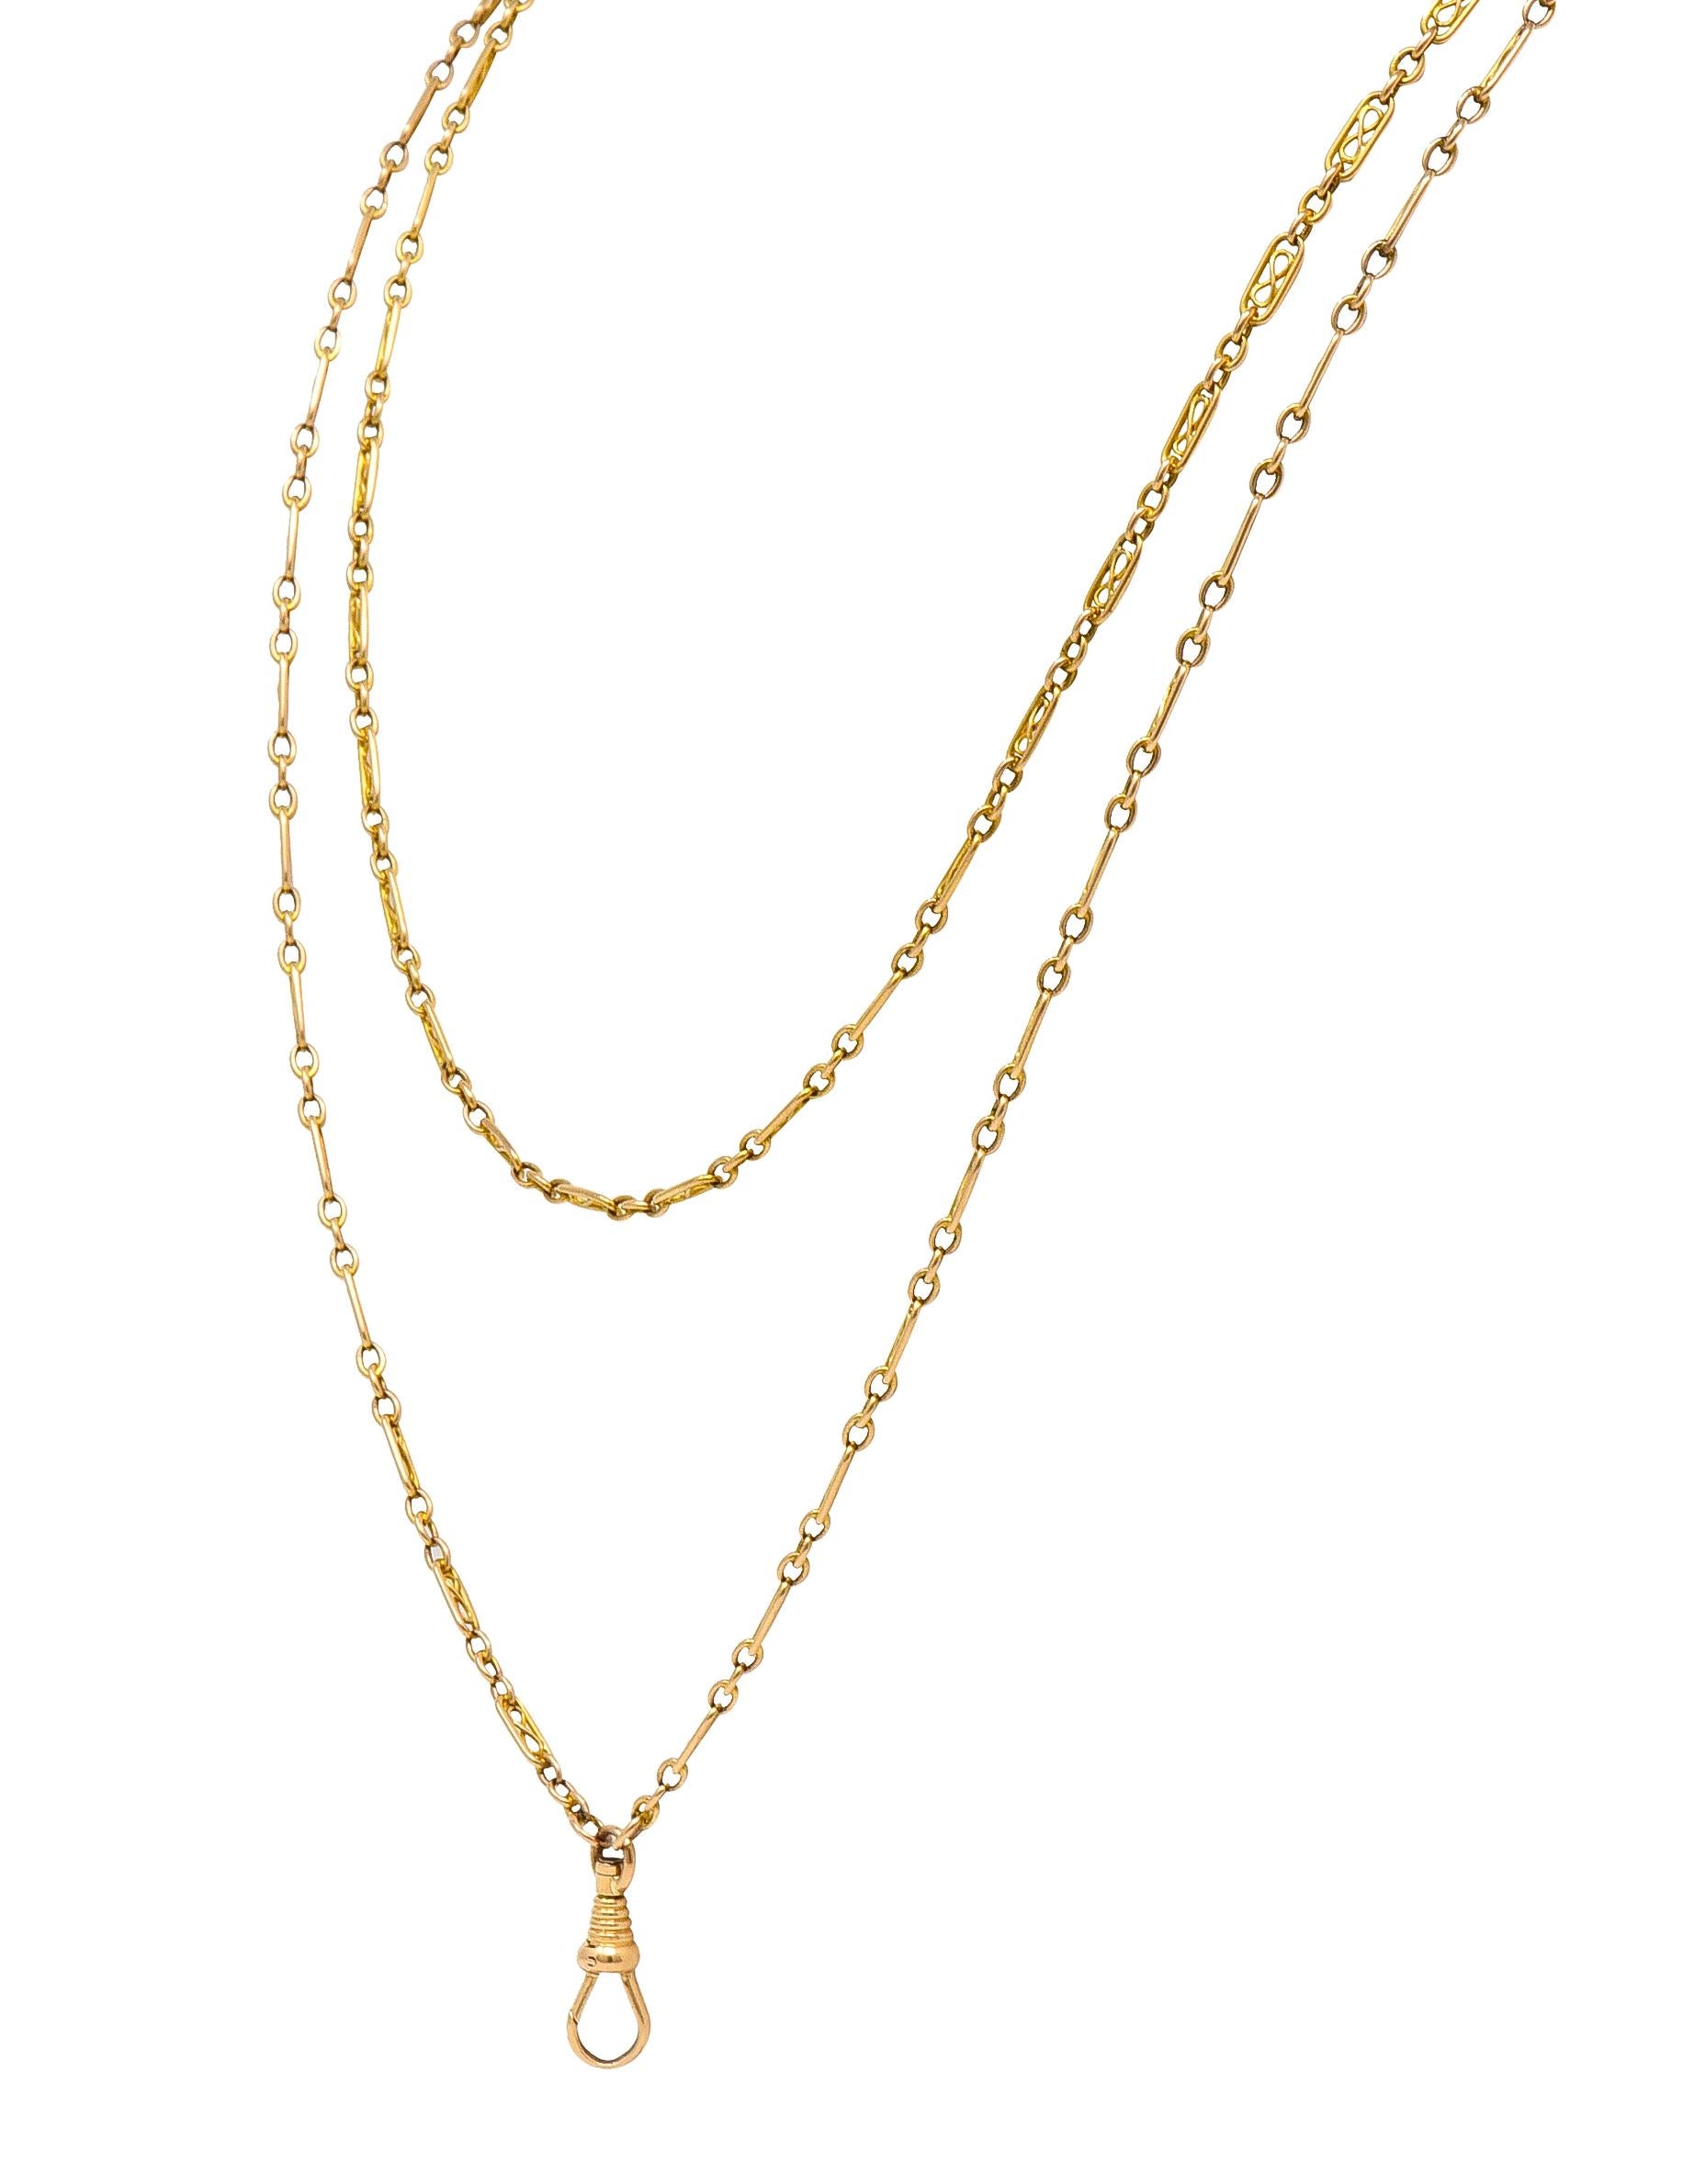 Women's Victorian 14 Karat Yellow Gold Link 64 1/2 IN Long Antique Fob Chain Necklace For Sale